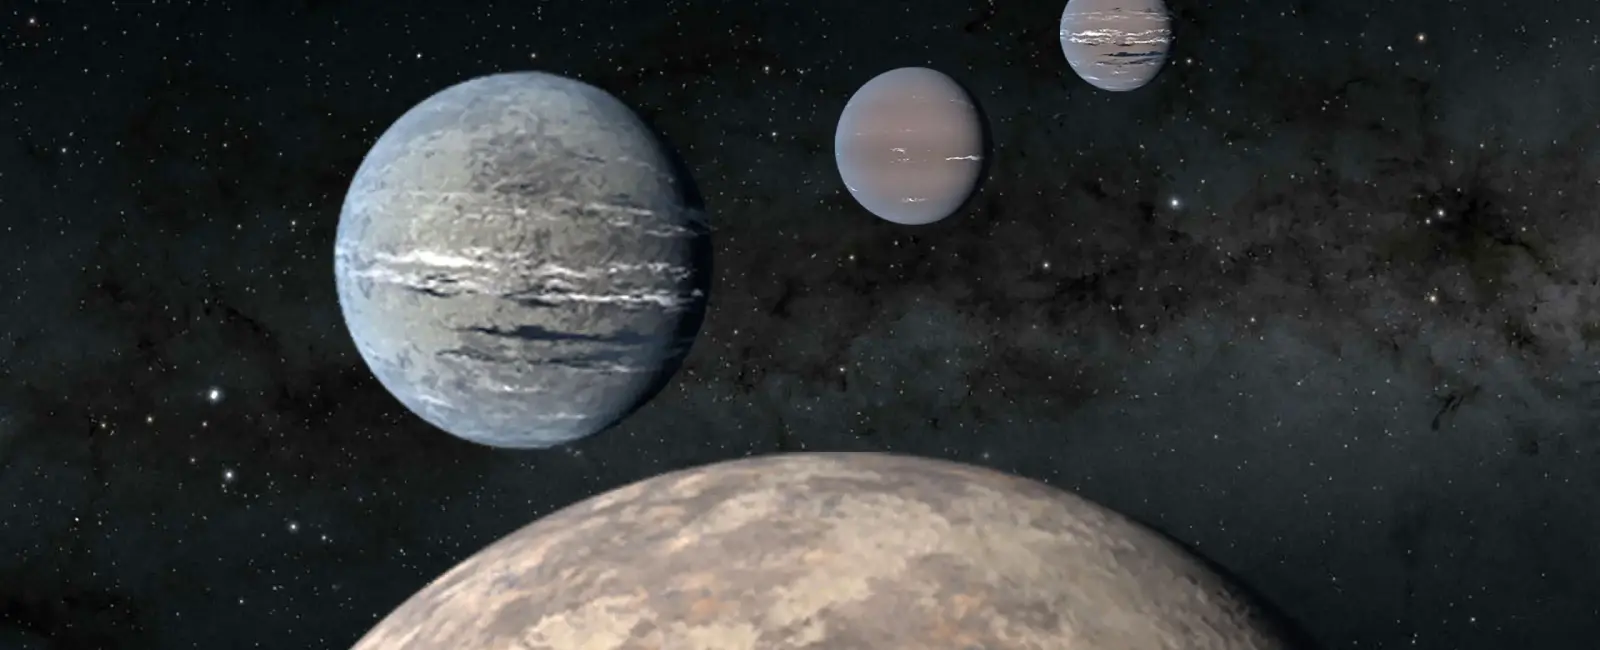 Exoplanets are planets that orbit stars every star you see from earth has at least one exoplanet